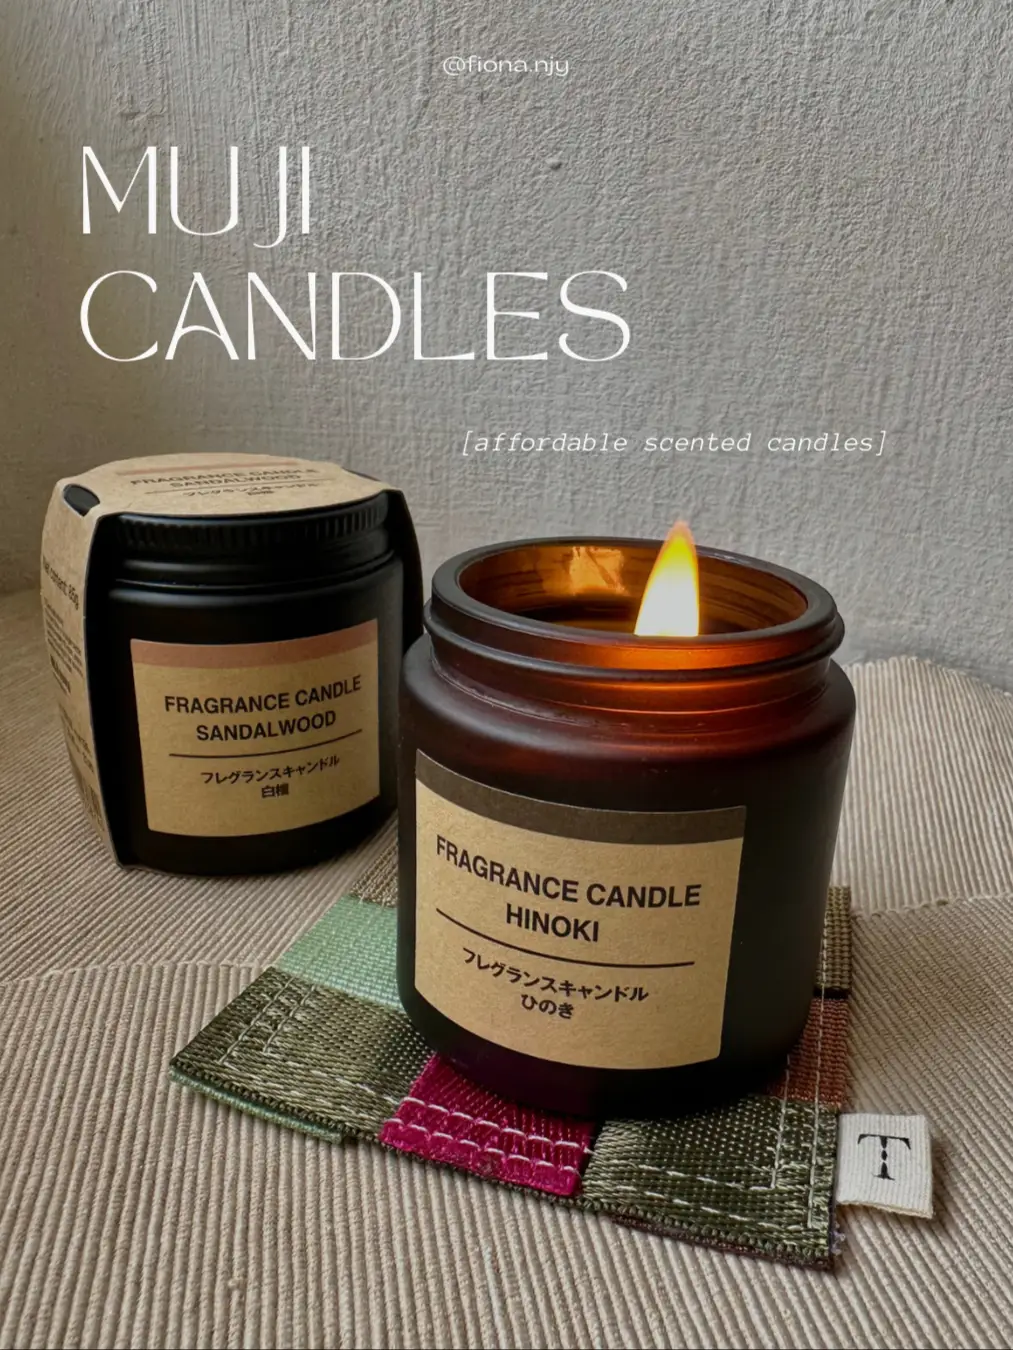 affordable scented candles from muji < $10 🌾's images